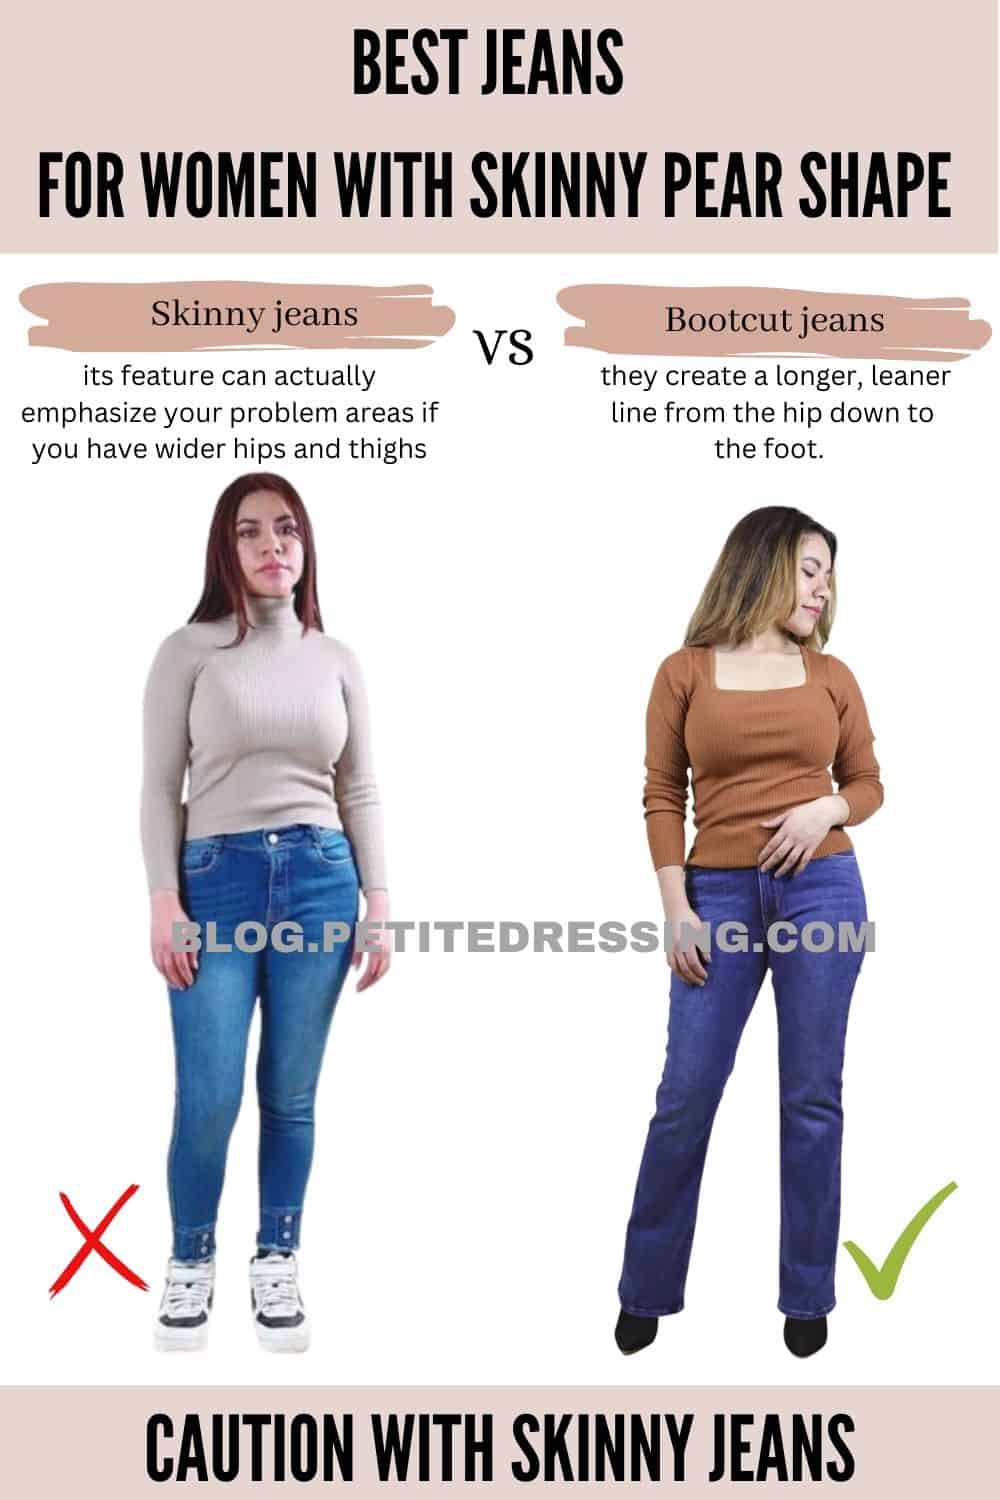 Jeans Guide for Women with Skinny Pear Shape